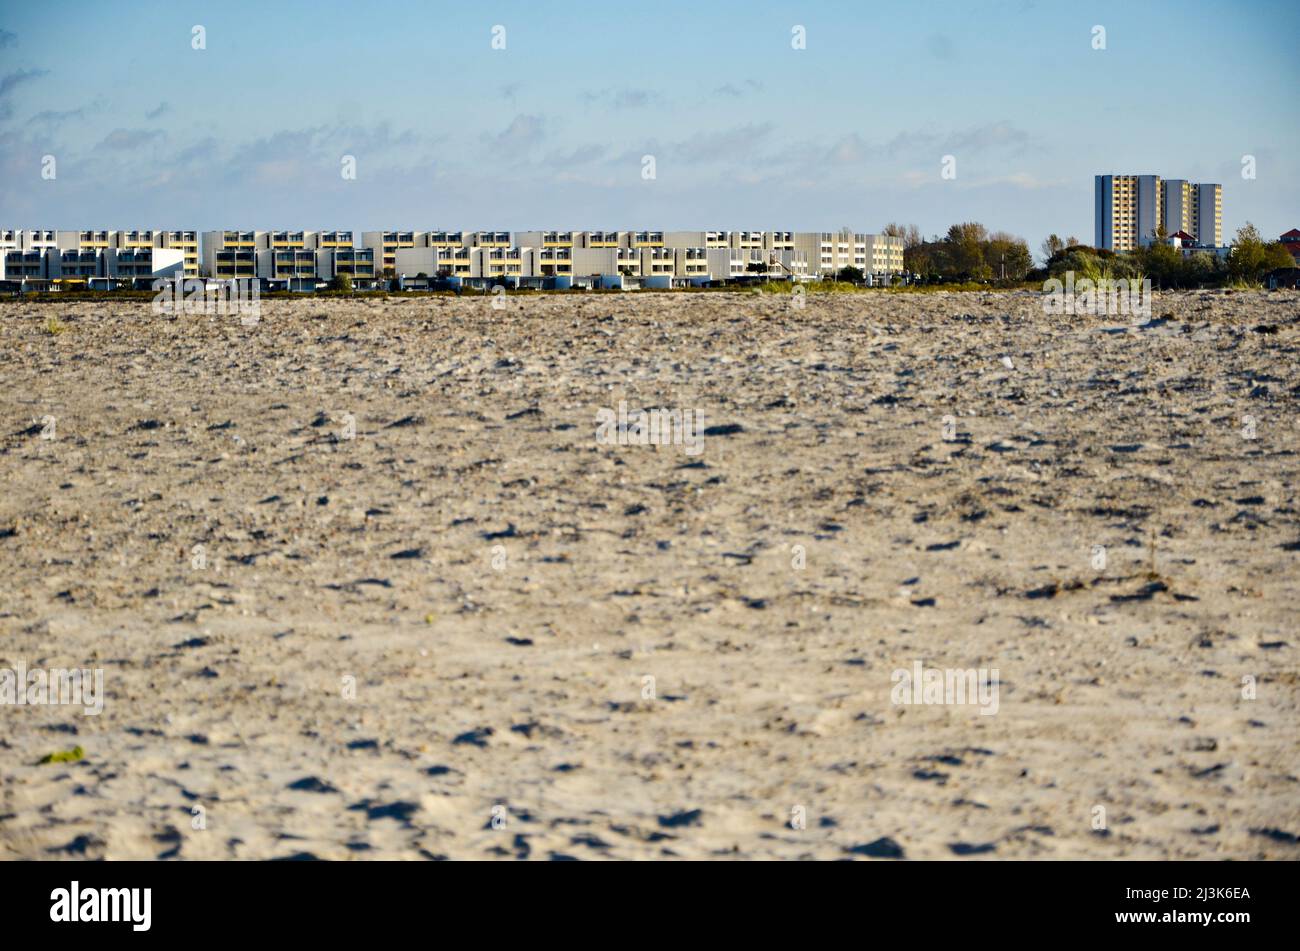 extensive sandy beach with holiday apartments and large Hotel on the horizon Stock Photo